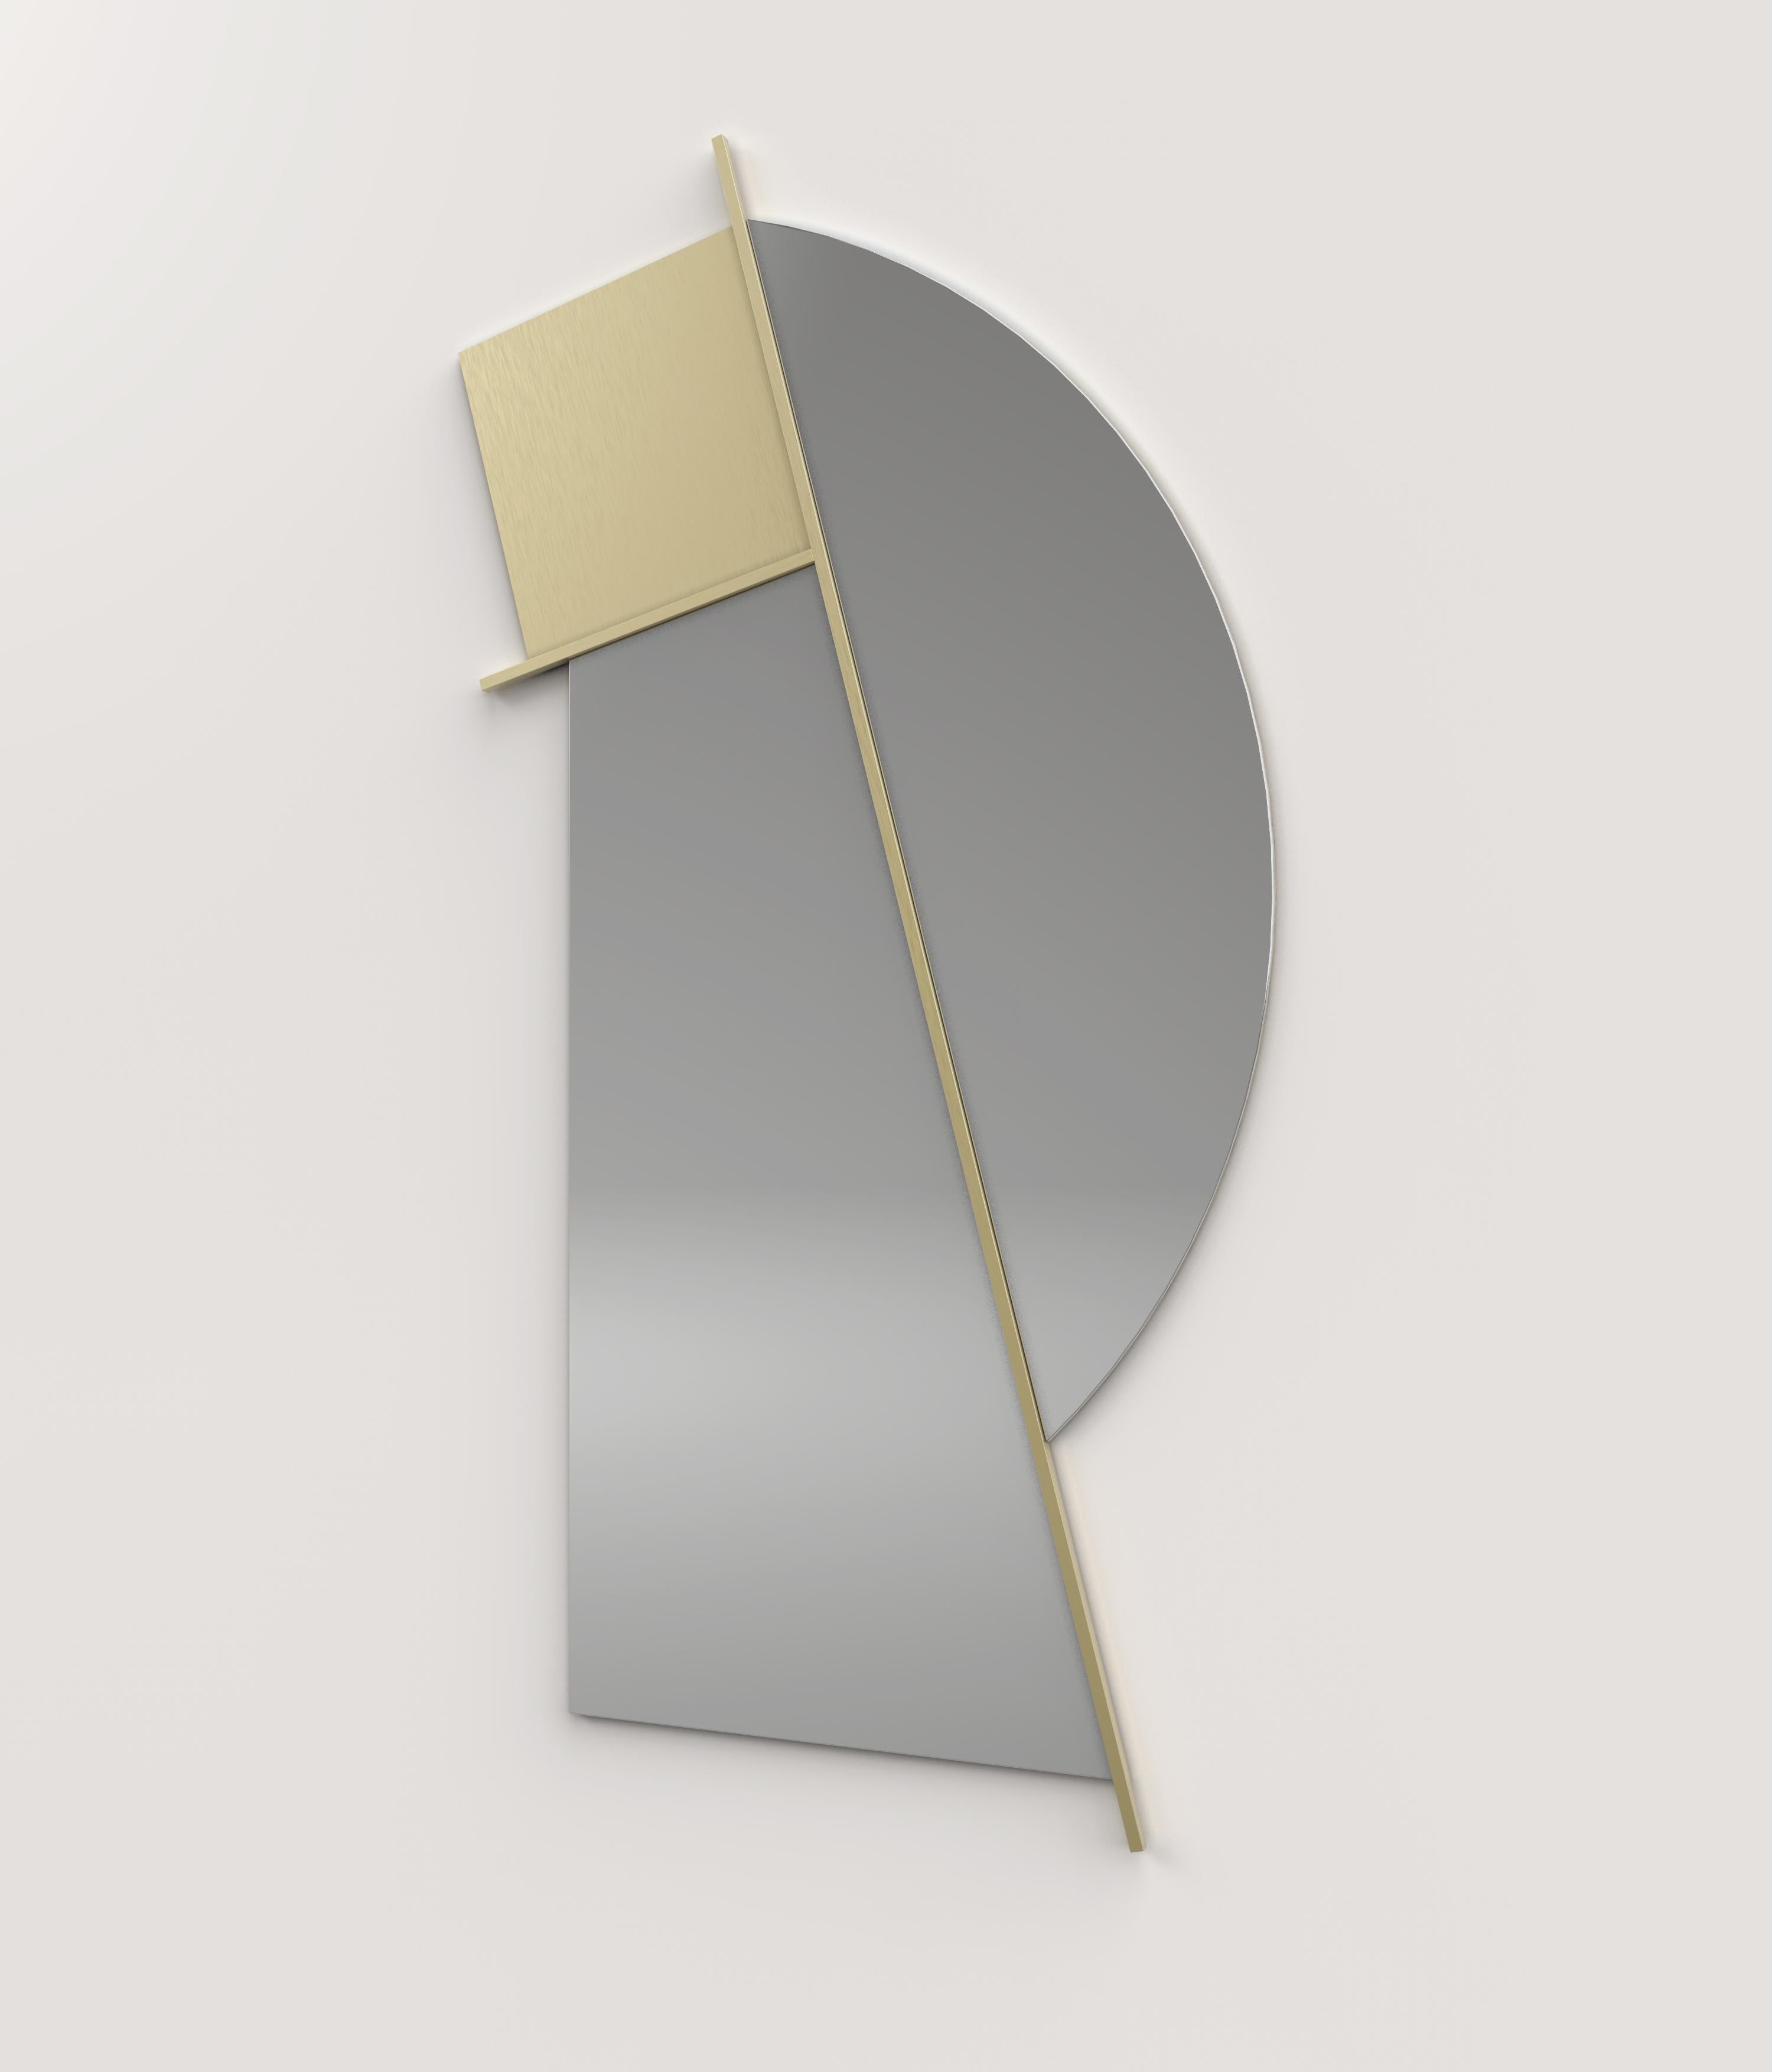 Nova V2 wall mirror by Edizione Limitata
Limited edition of 1000 pieces. Signed and numbered.
Dimensions: D 67 x W 4 x H 128 cm
Materials: brass+ classic finish mirror

Nova is a collection of contemporary mirrors made by Italian artisans in